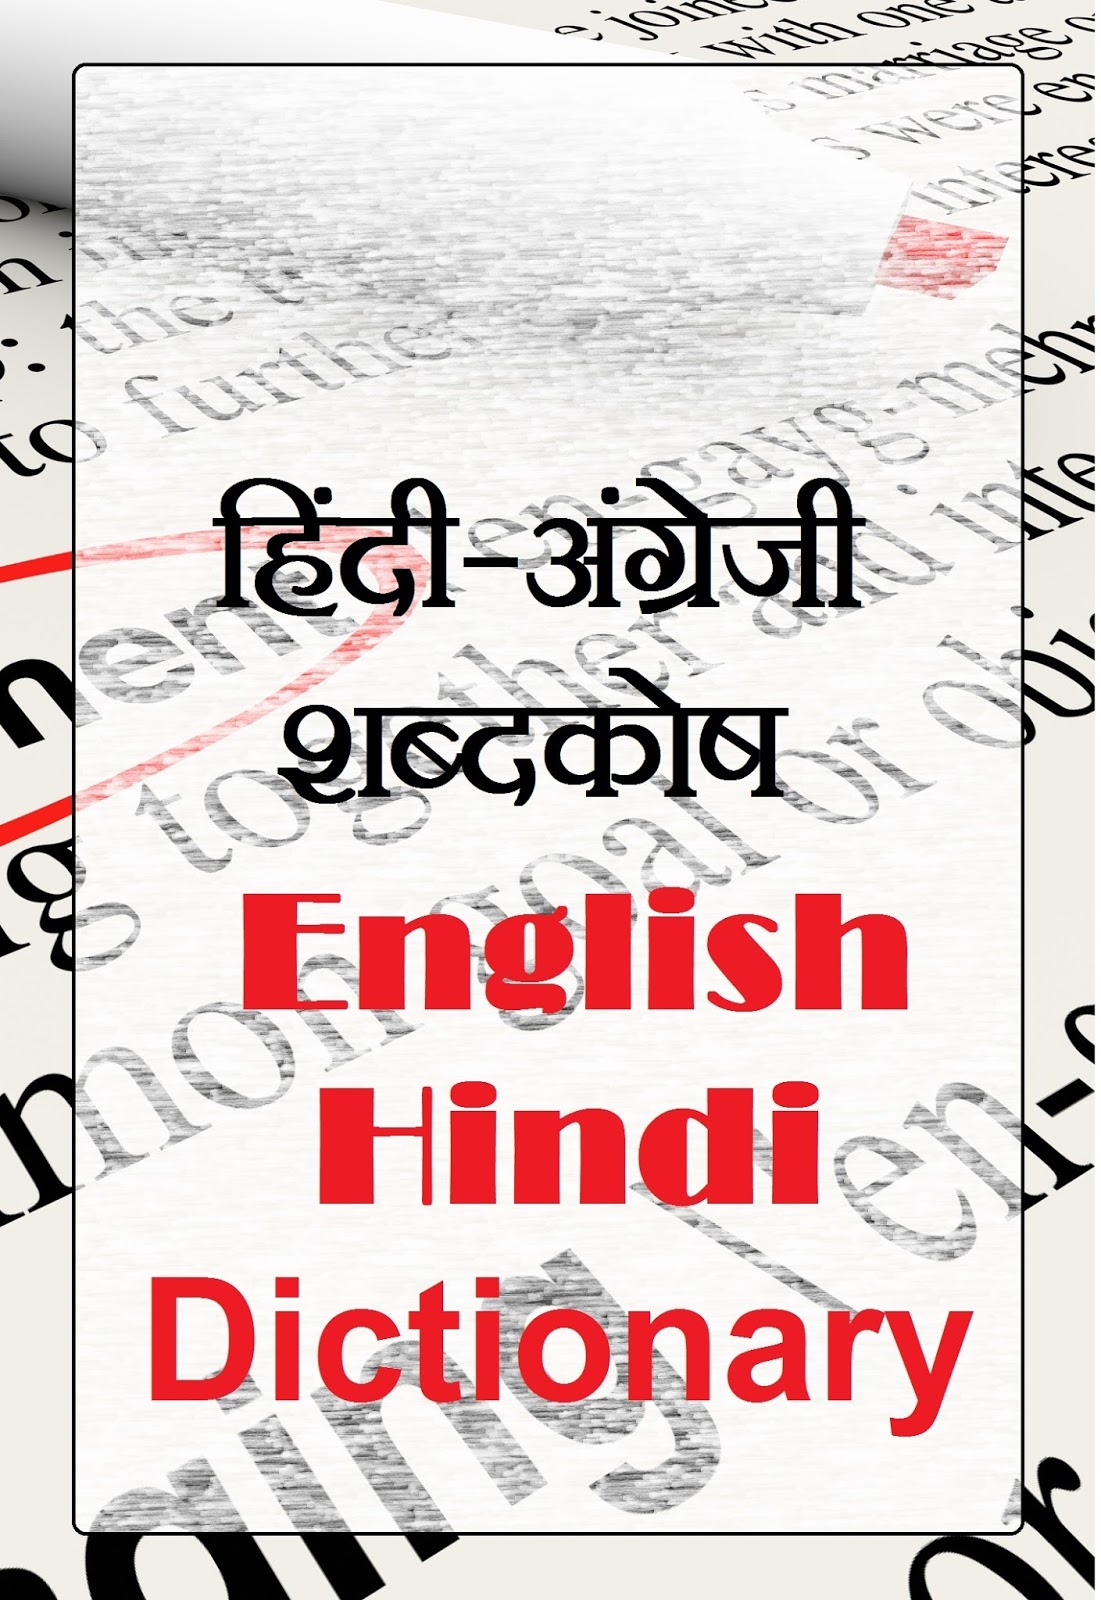 Dictionary english to hindi free download for mobile pdf download